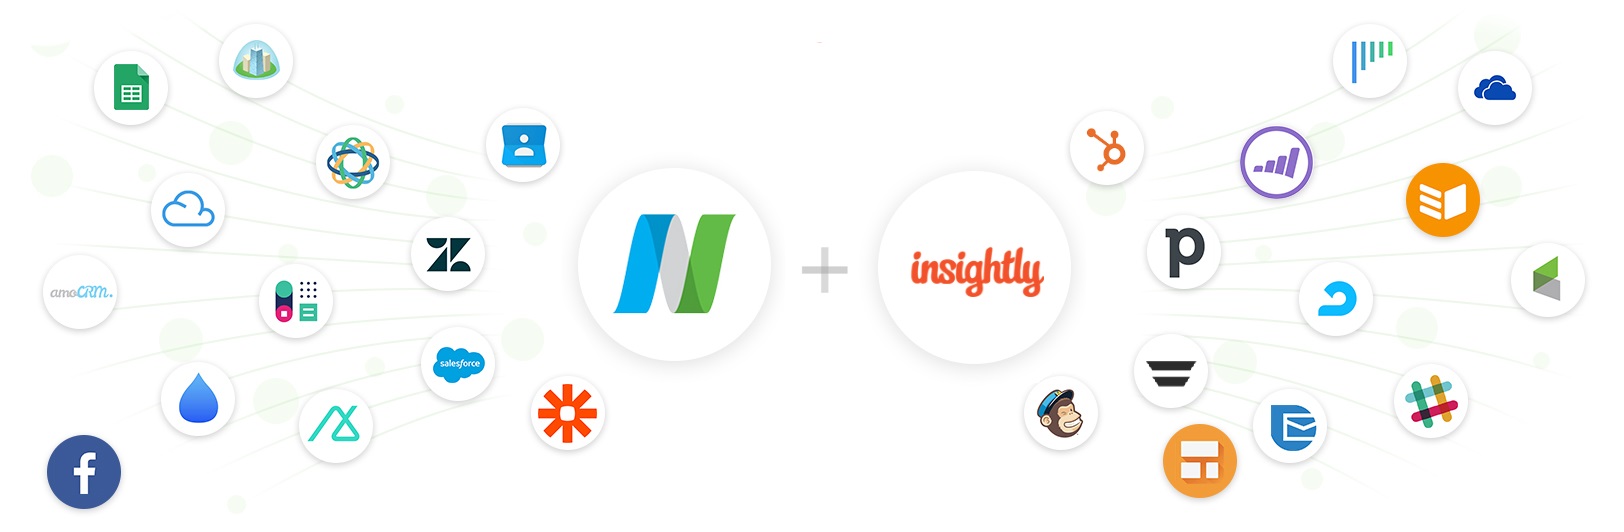 VoIP NUACOM and Insightly Integration